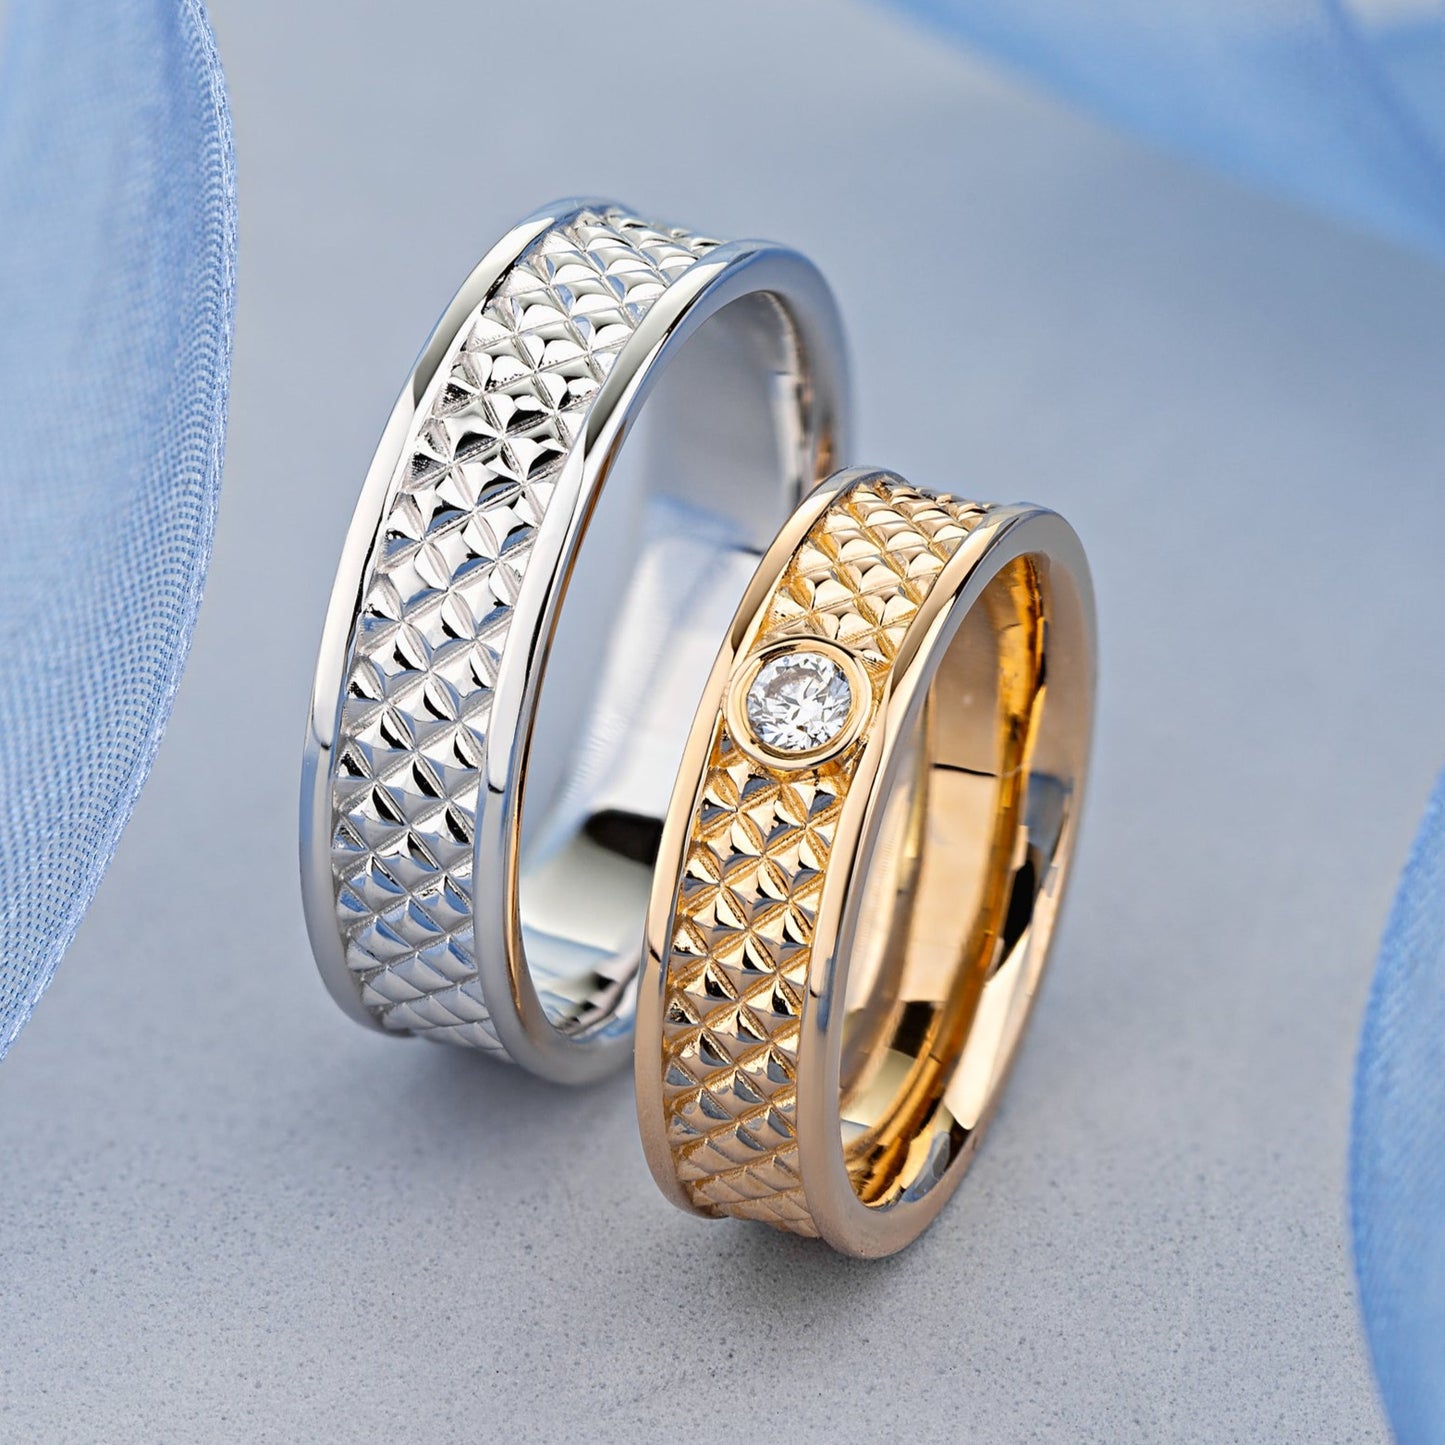 Unique wedding rings. Couple wedding rings. Matching wedding rings set. wedding band set his and hers. Gold wedding rings with diamond.